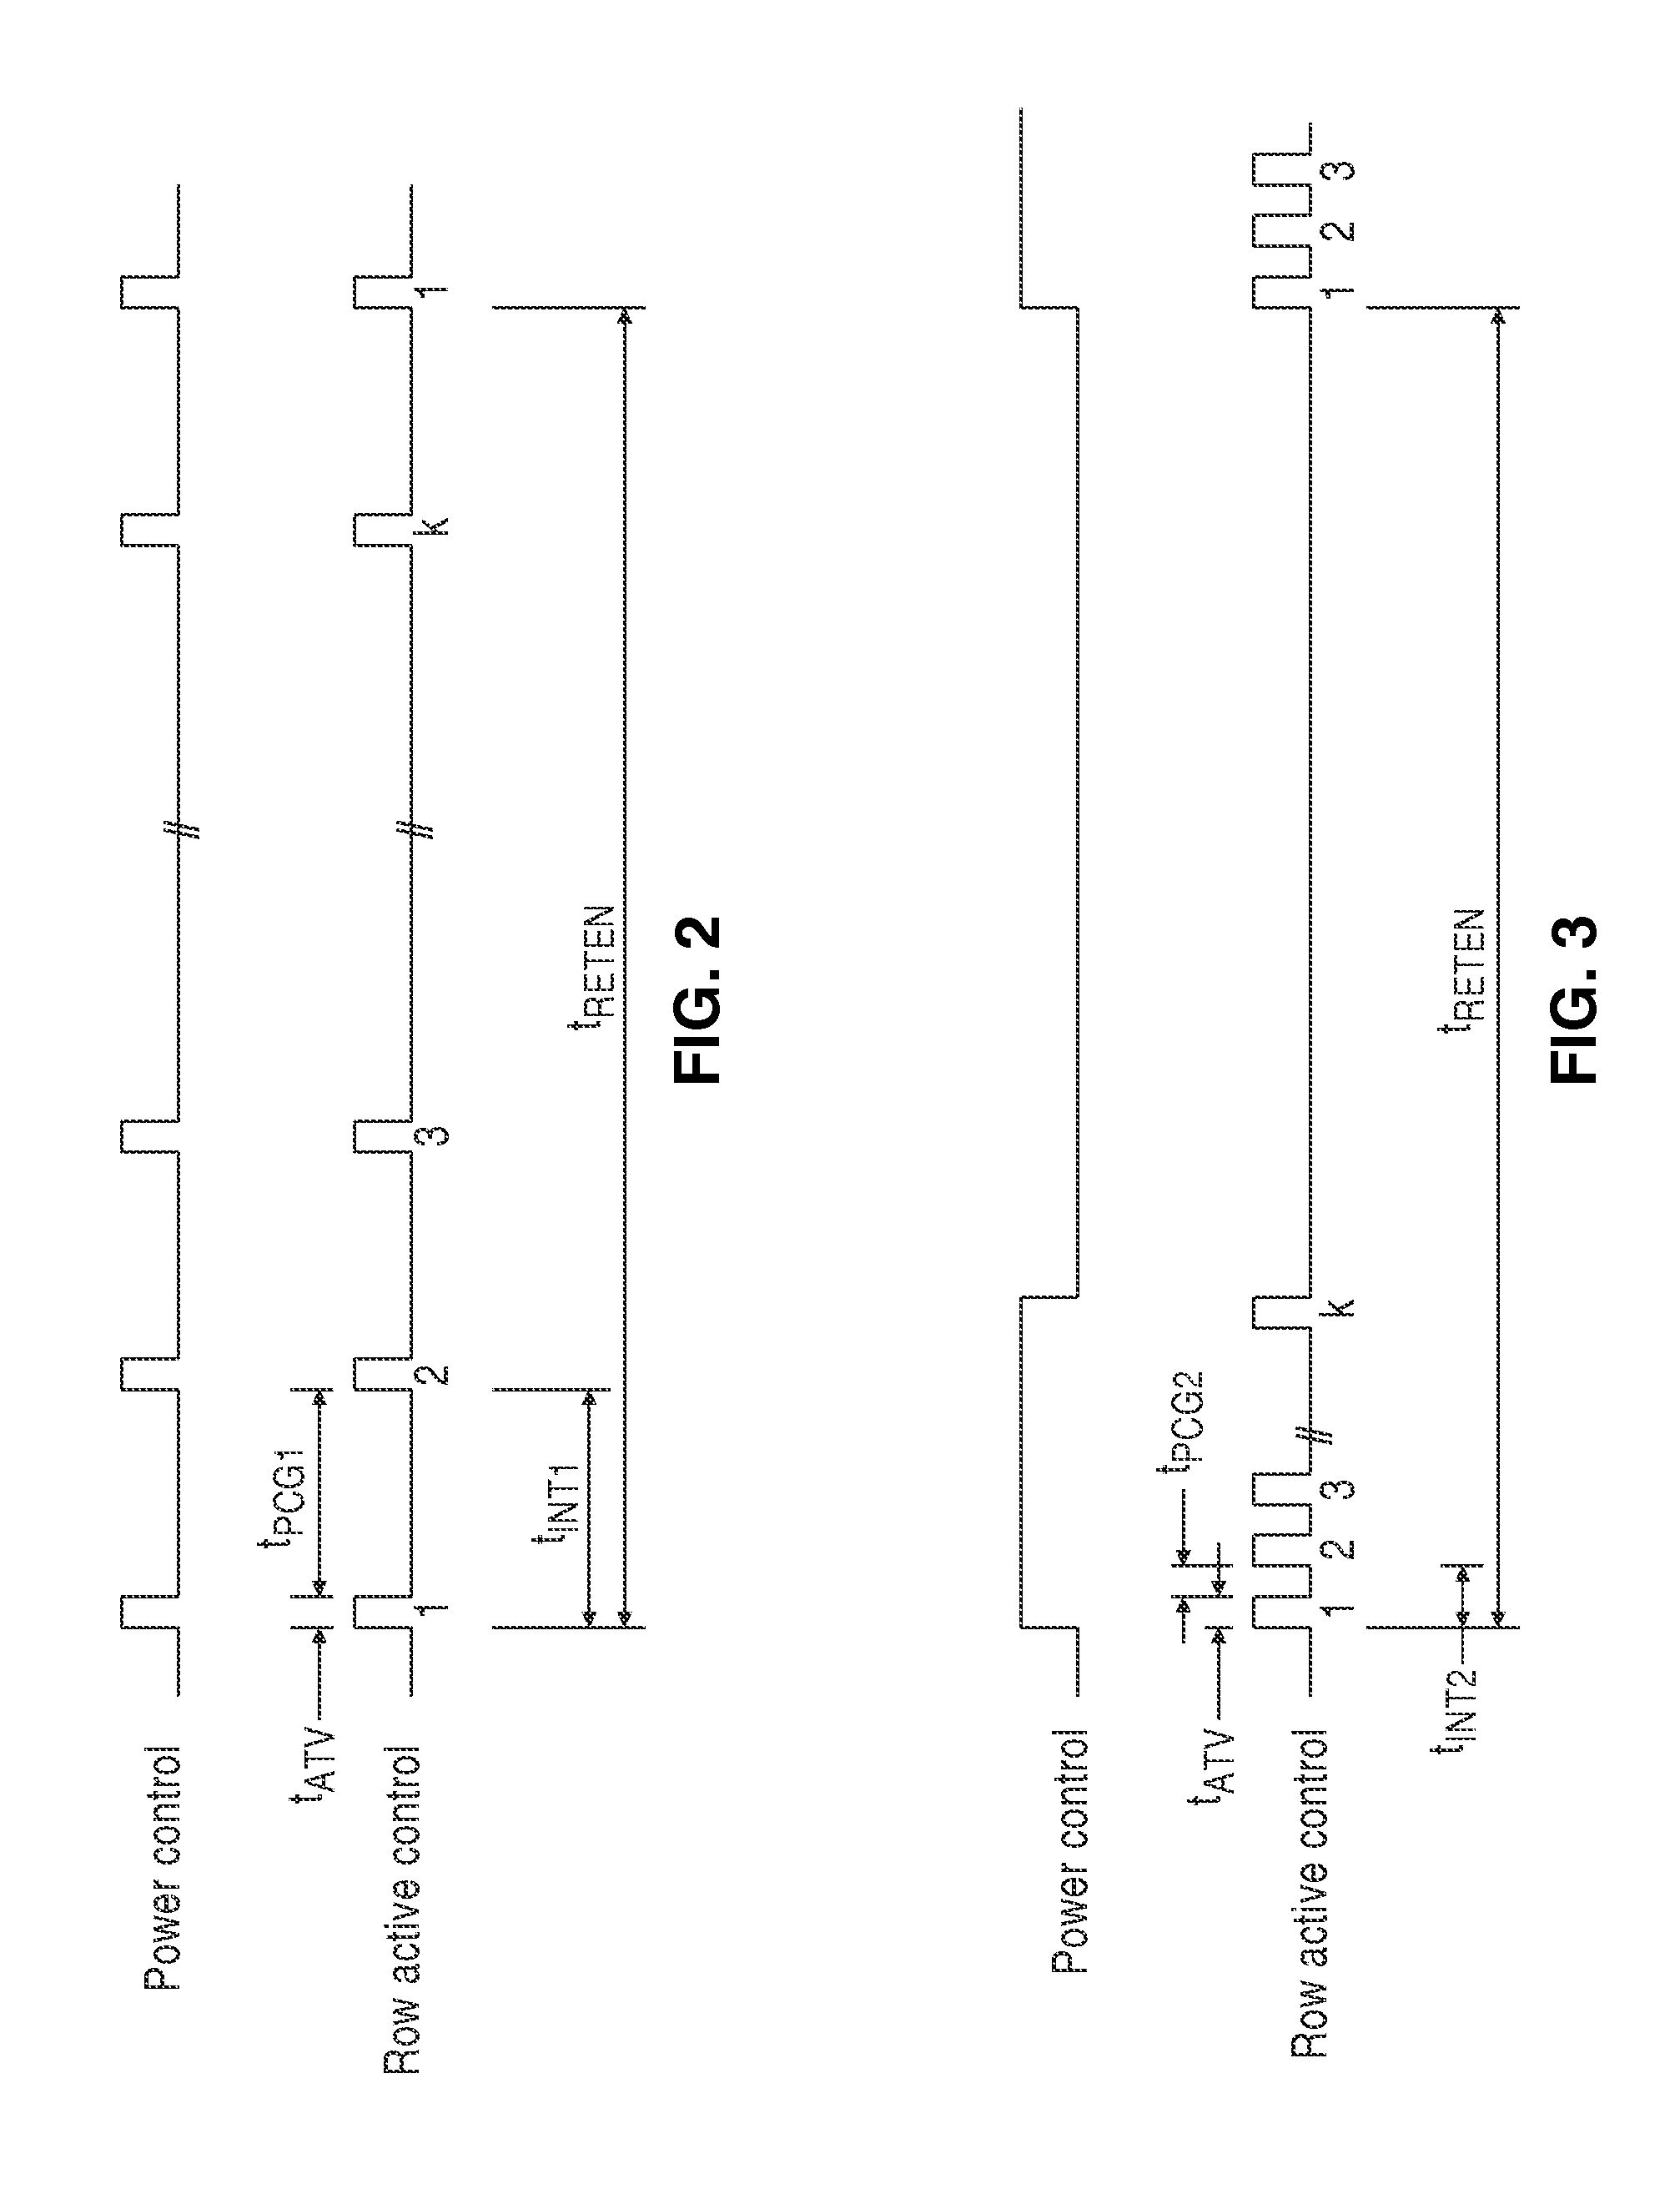 Dynamic memory refresh configurations and leakage control methods